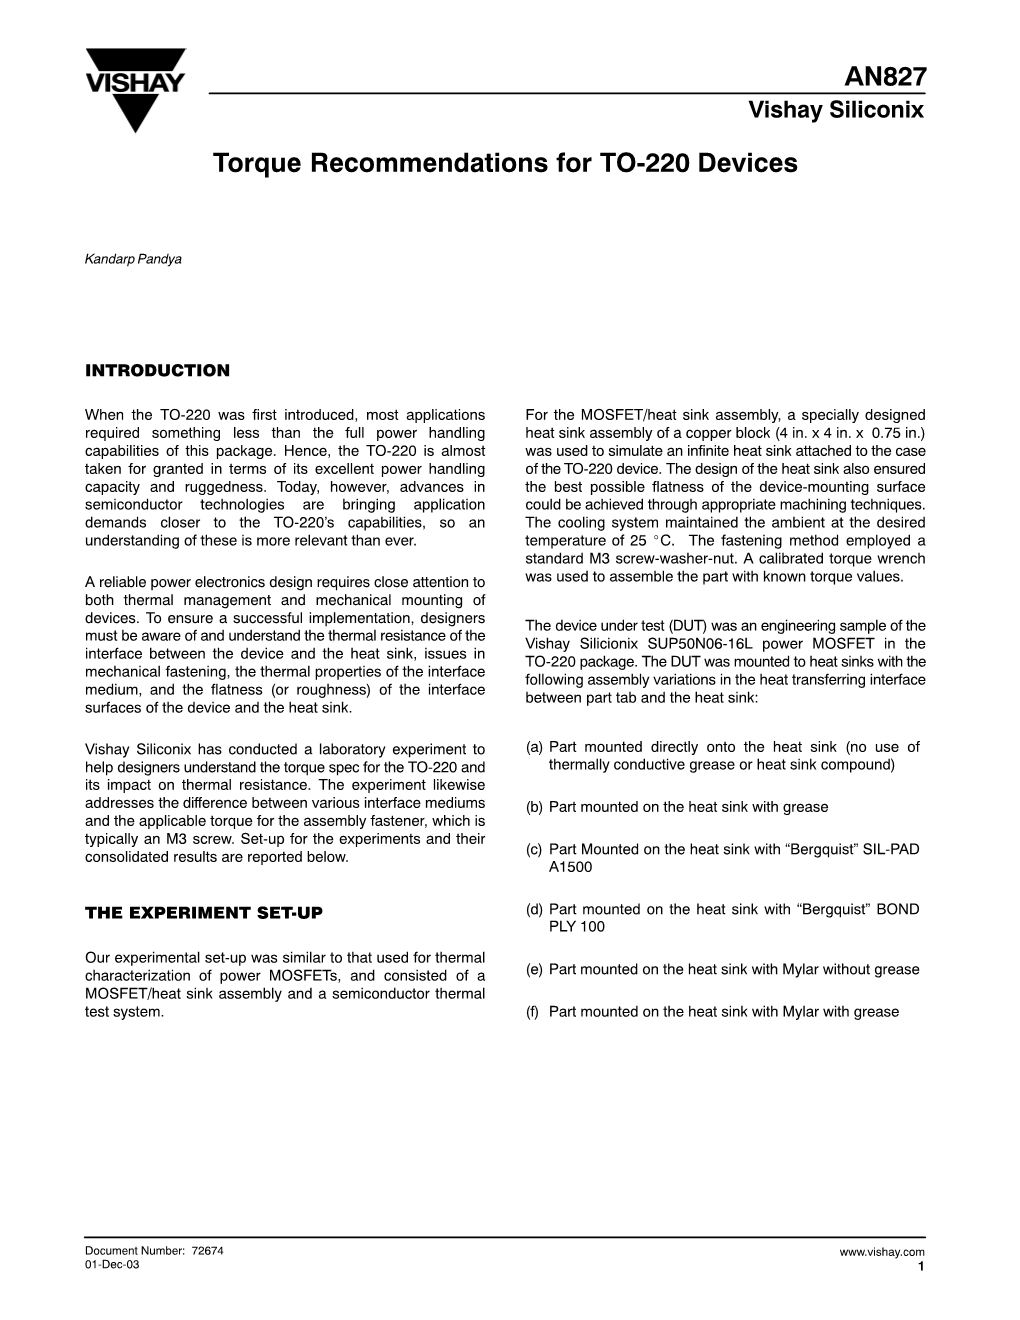 AN827 Torque Recommendations for TO-220 Devices